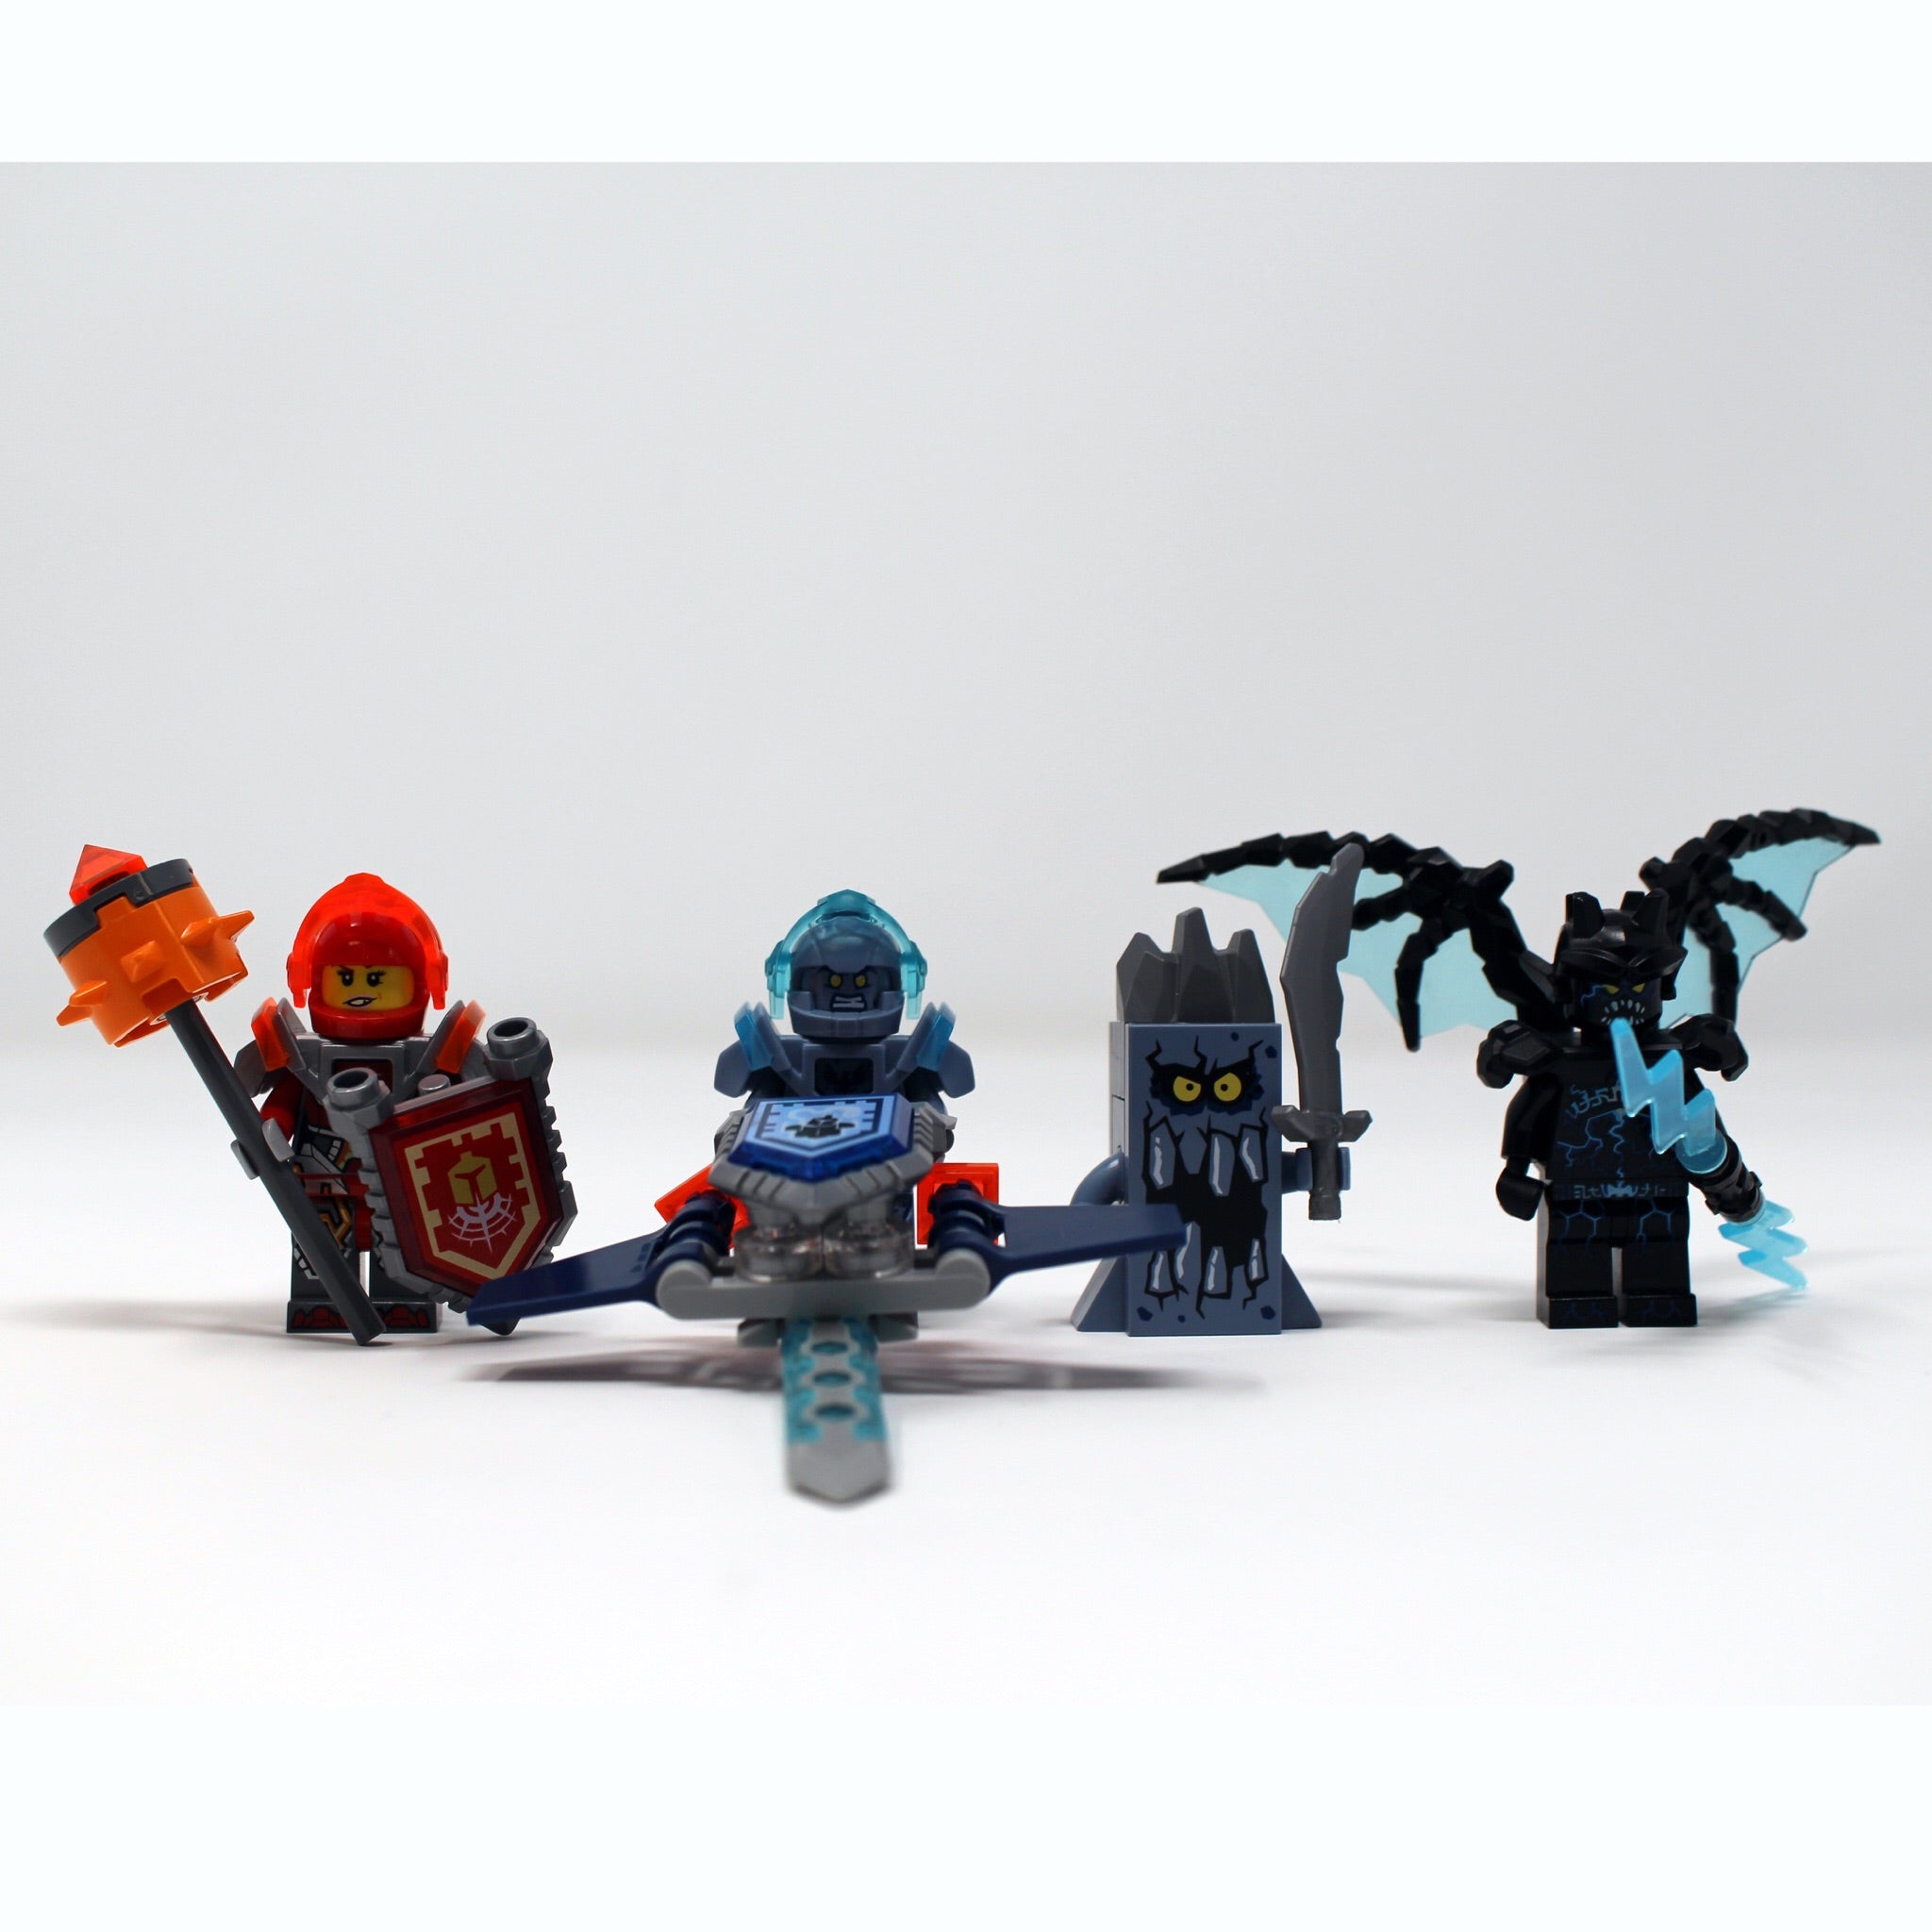 Used Set 70356 Nexo Knights The Stone Colossus of Ultimate Destruction